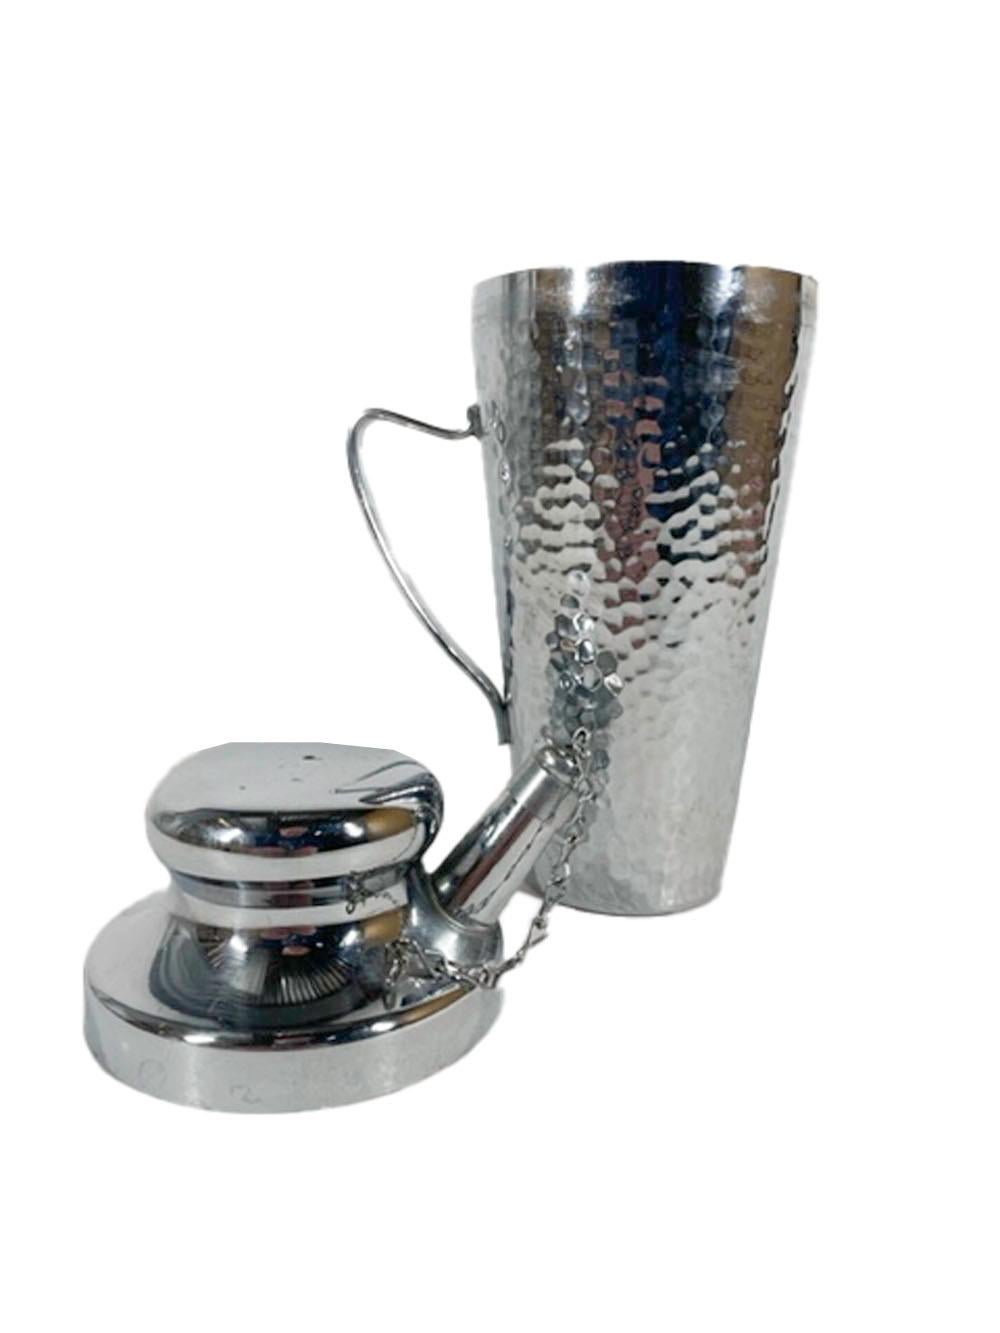 American Vintage Cocktail Shaker of Hammered Chrome with Spout Cap Chained to Lid